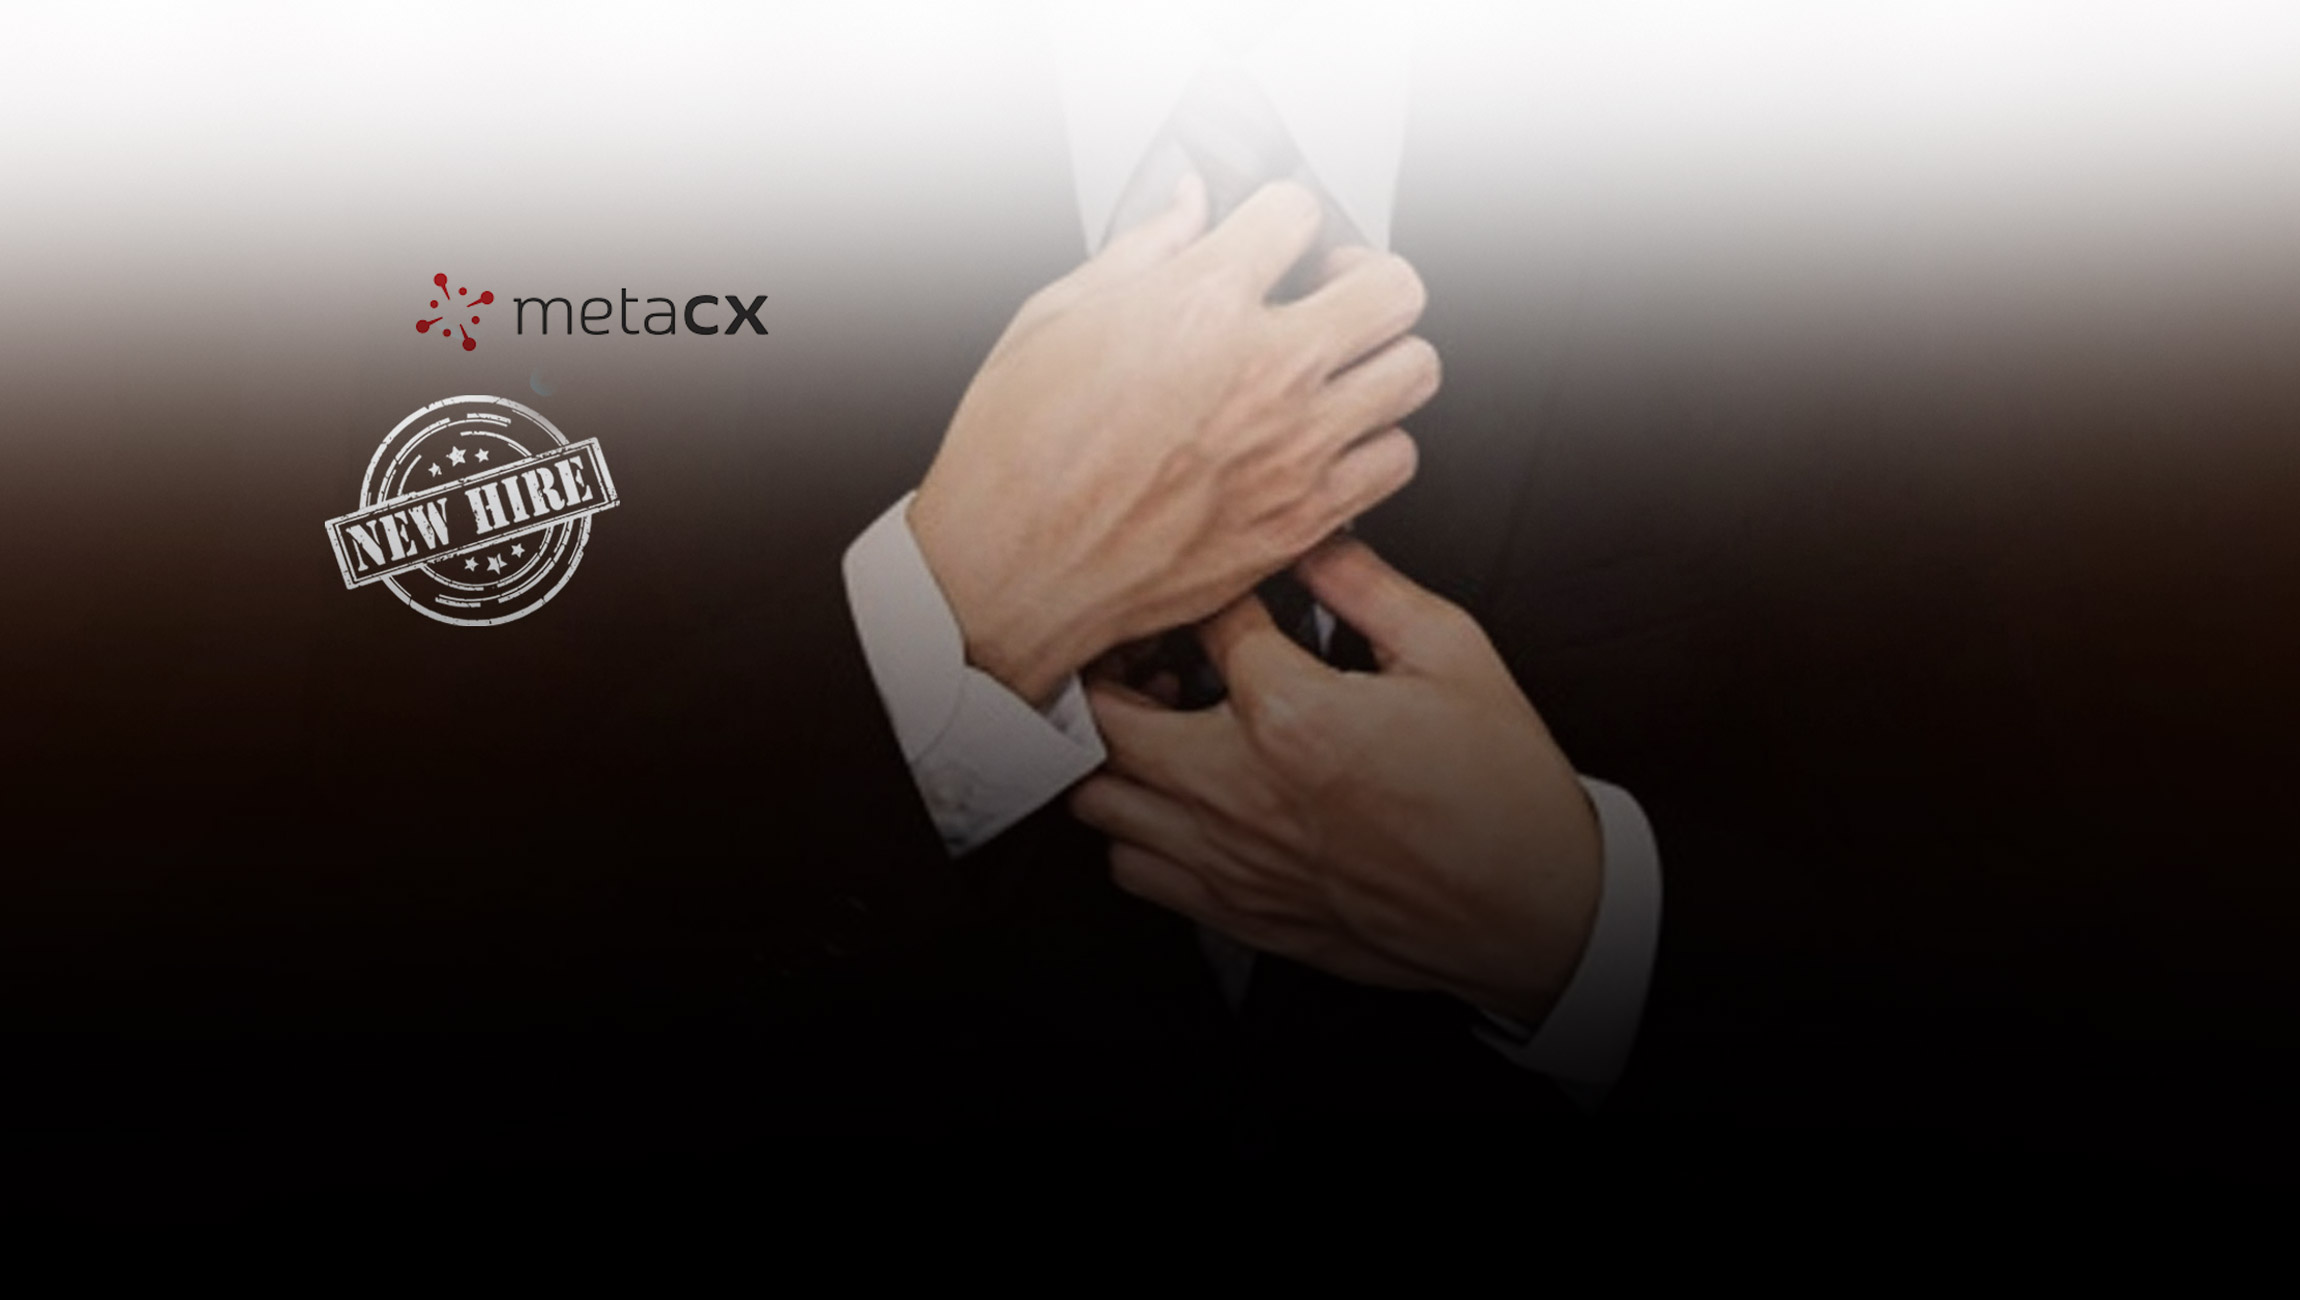 MetaCX Appoints Former Facebook Executive as Chief Product Officer